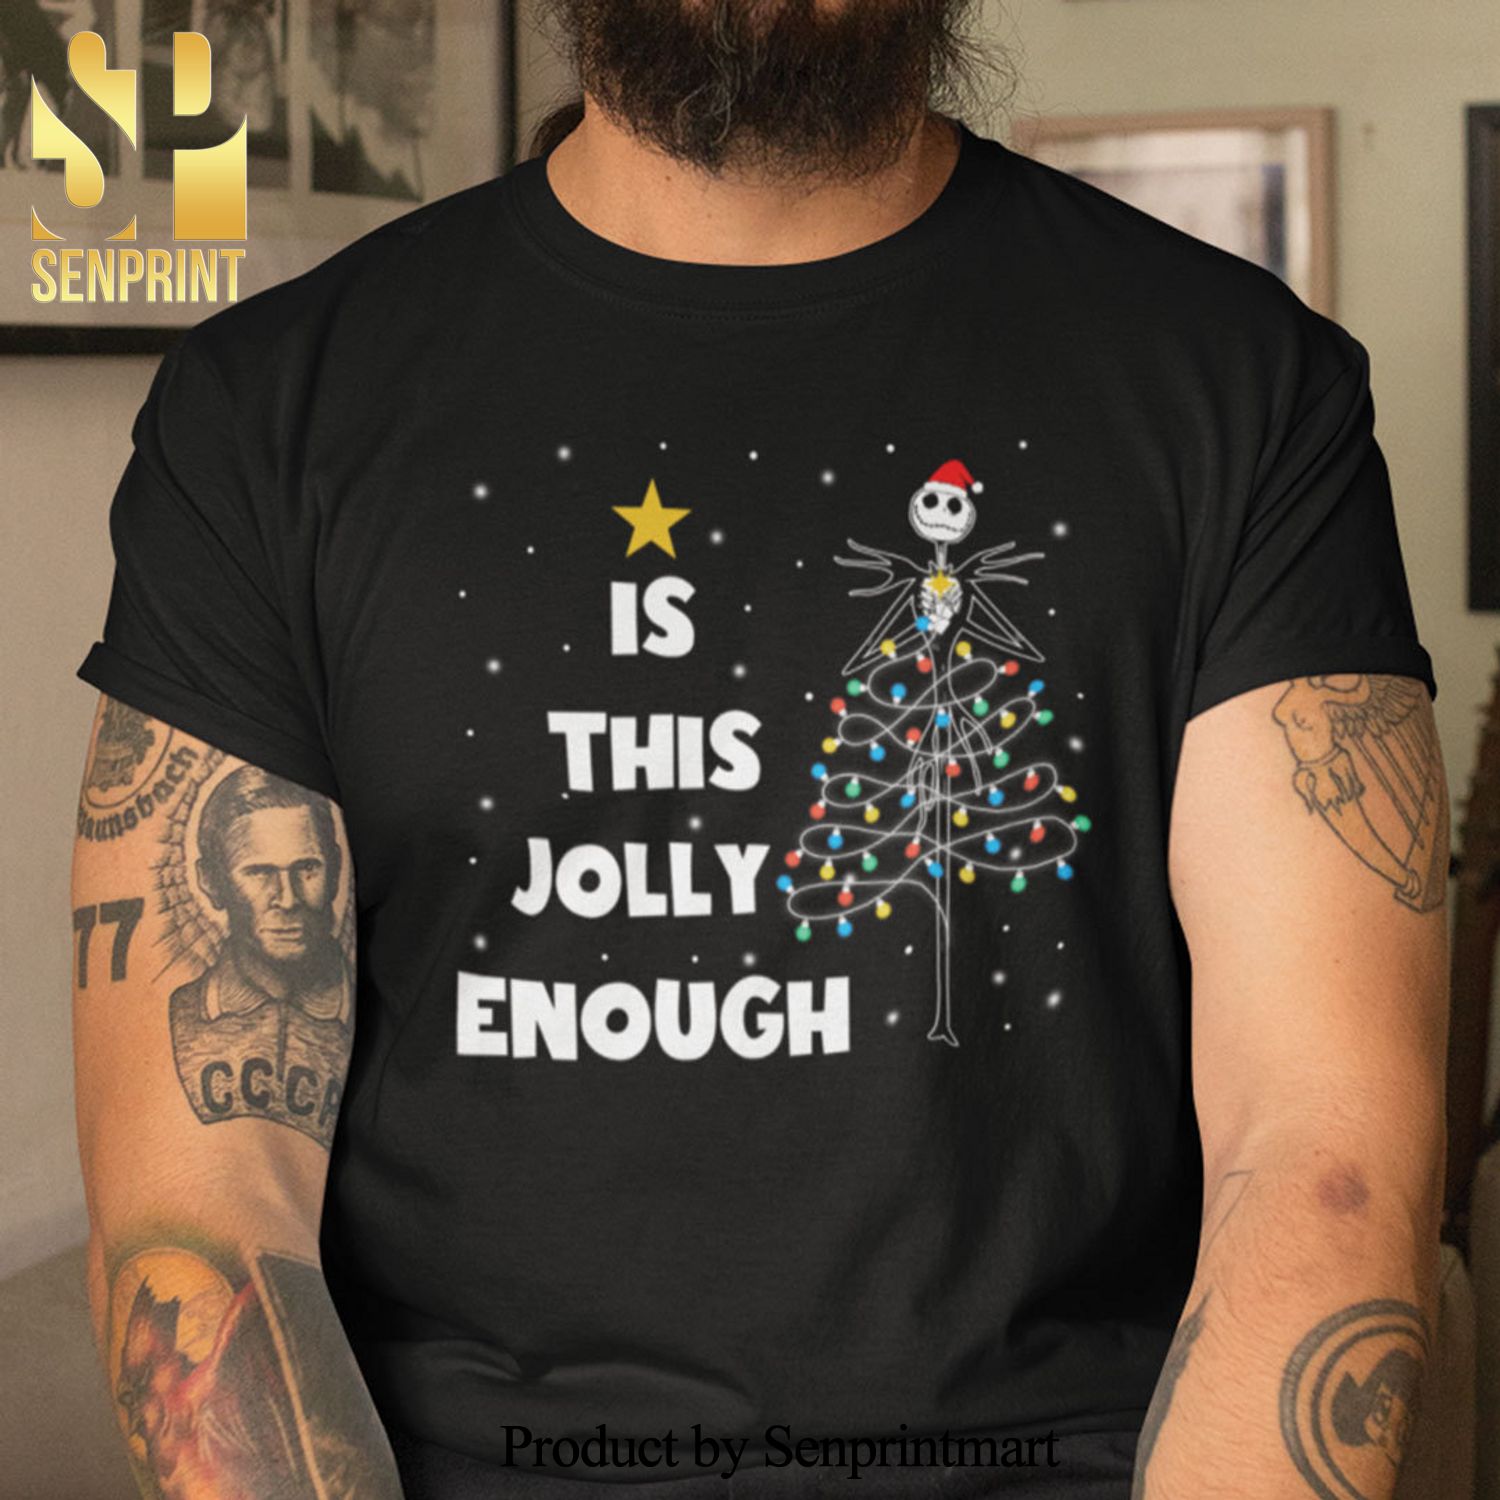 The Nightmare Christmas Gifts Shirts Is This Jolly Enough